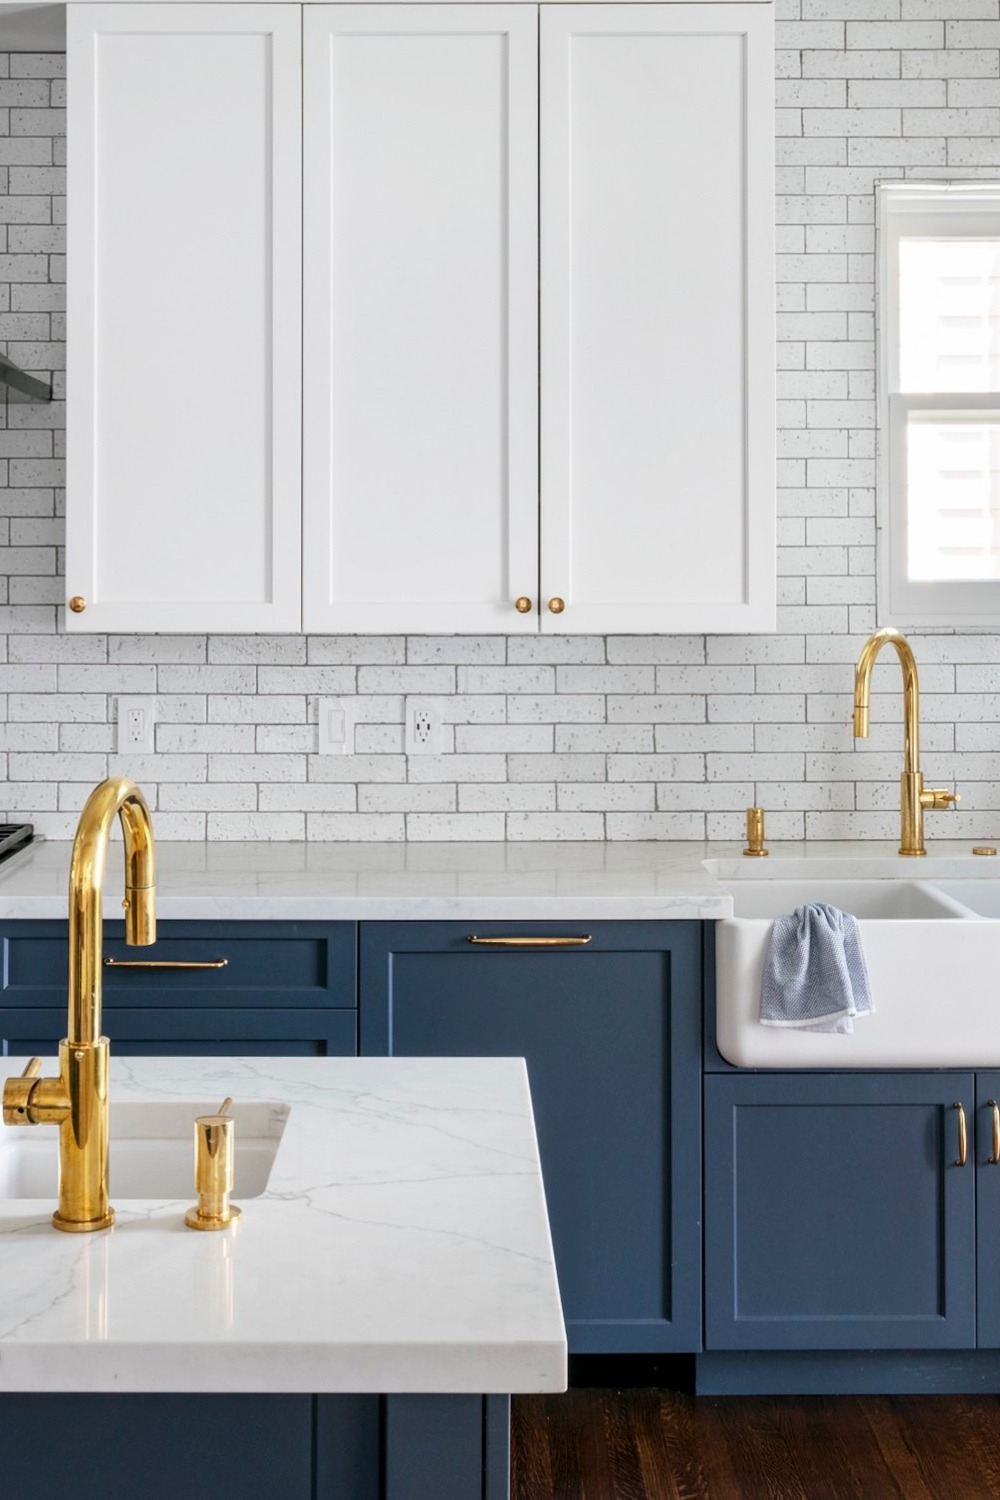 Blue And White Kitchen Features White upper Cabinets Blue Lower Cabinets Marble Countertops Farmhouse Sink Backsplash Navy Blue Cabinets Backsplash White Countertops